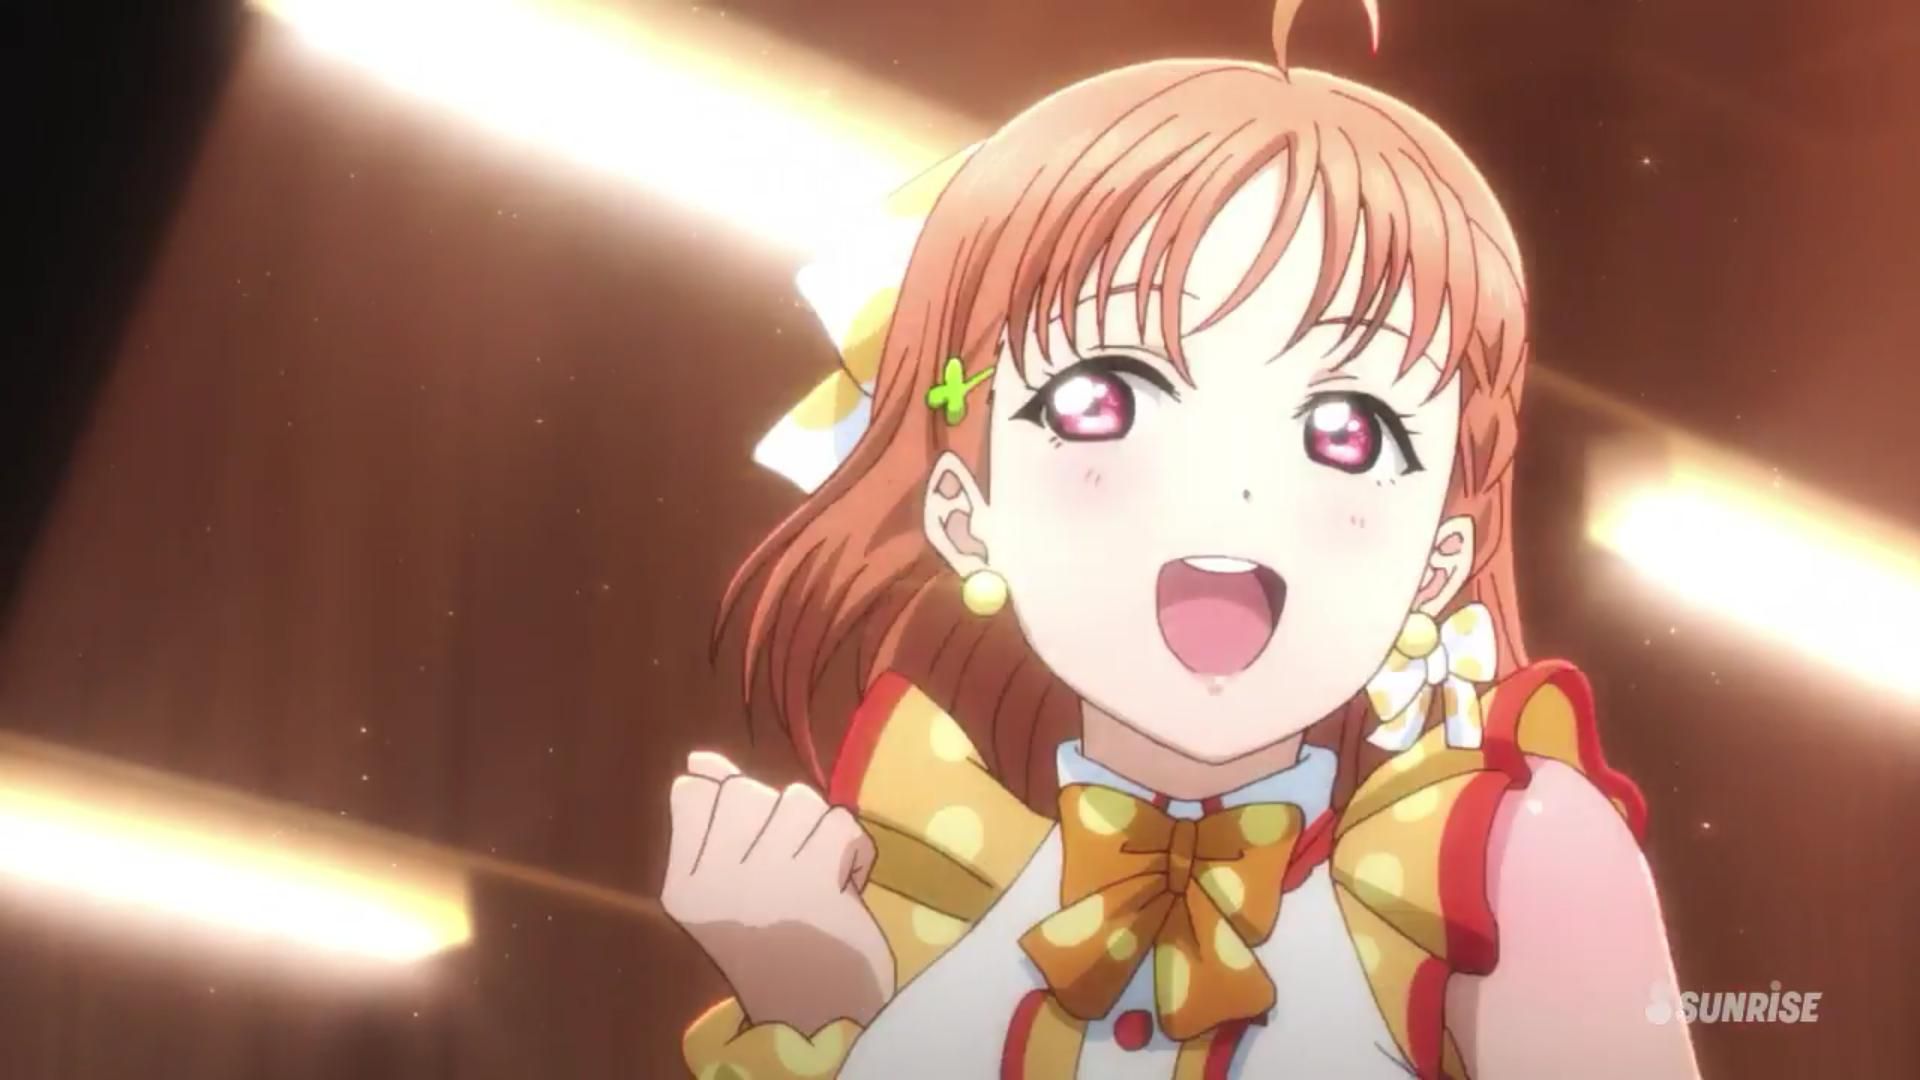 [Image] "love live! Sunshine "1000 songs she bend was its cute scene image competitions wwwwwwwwww 21